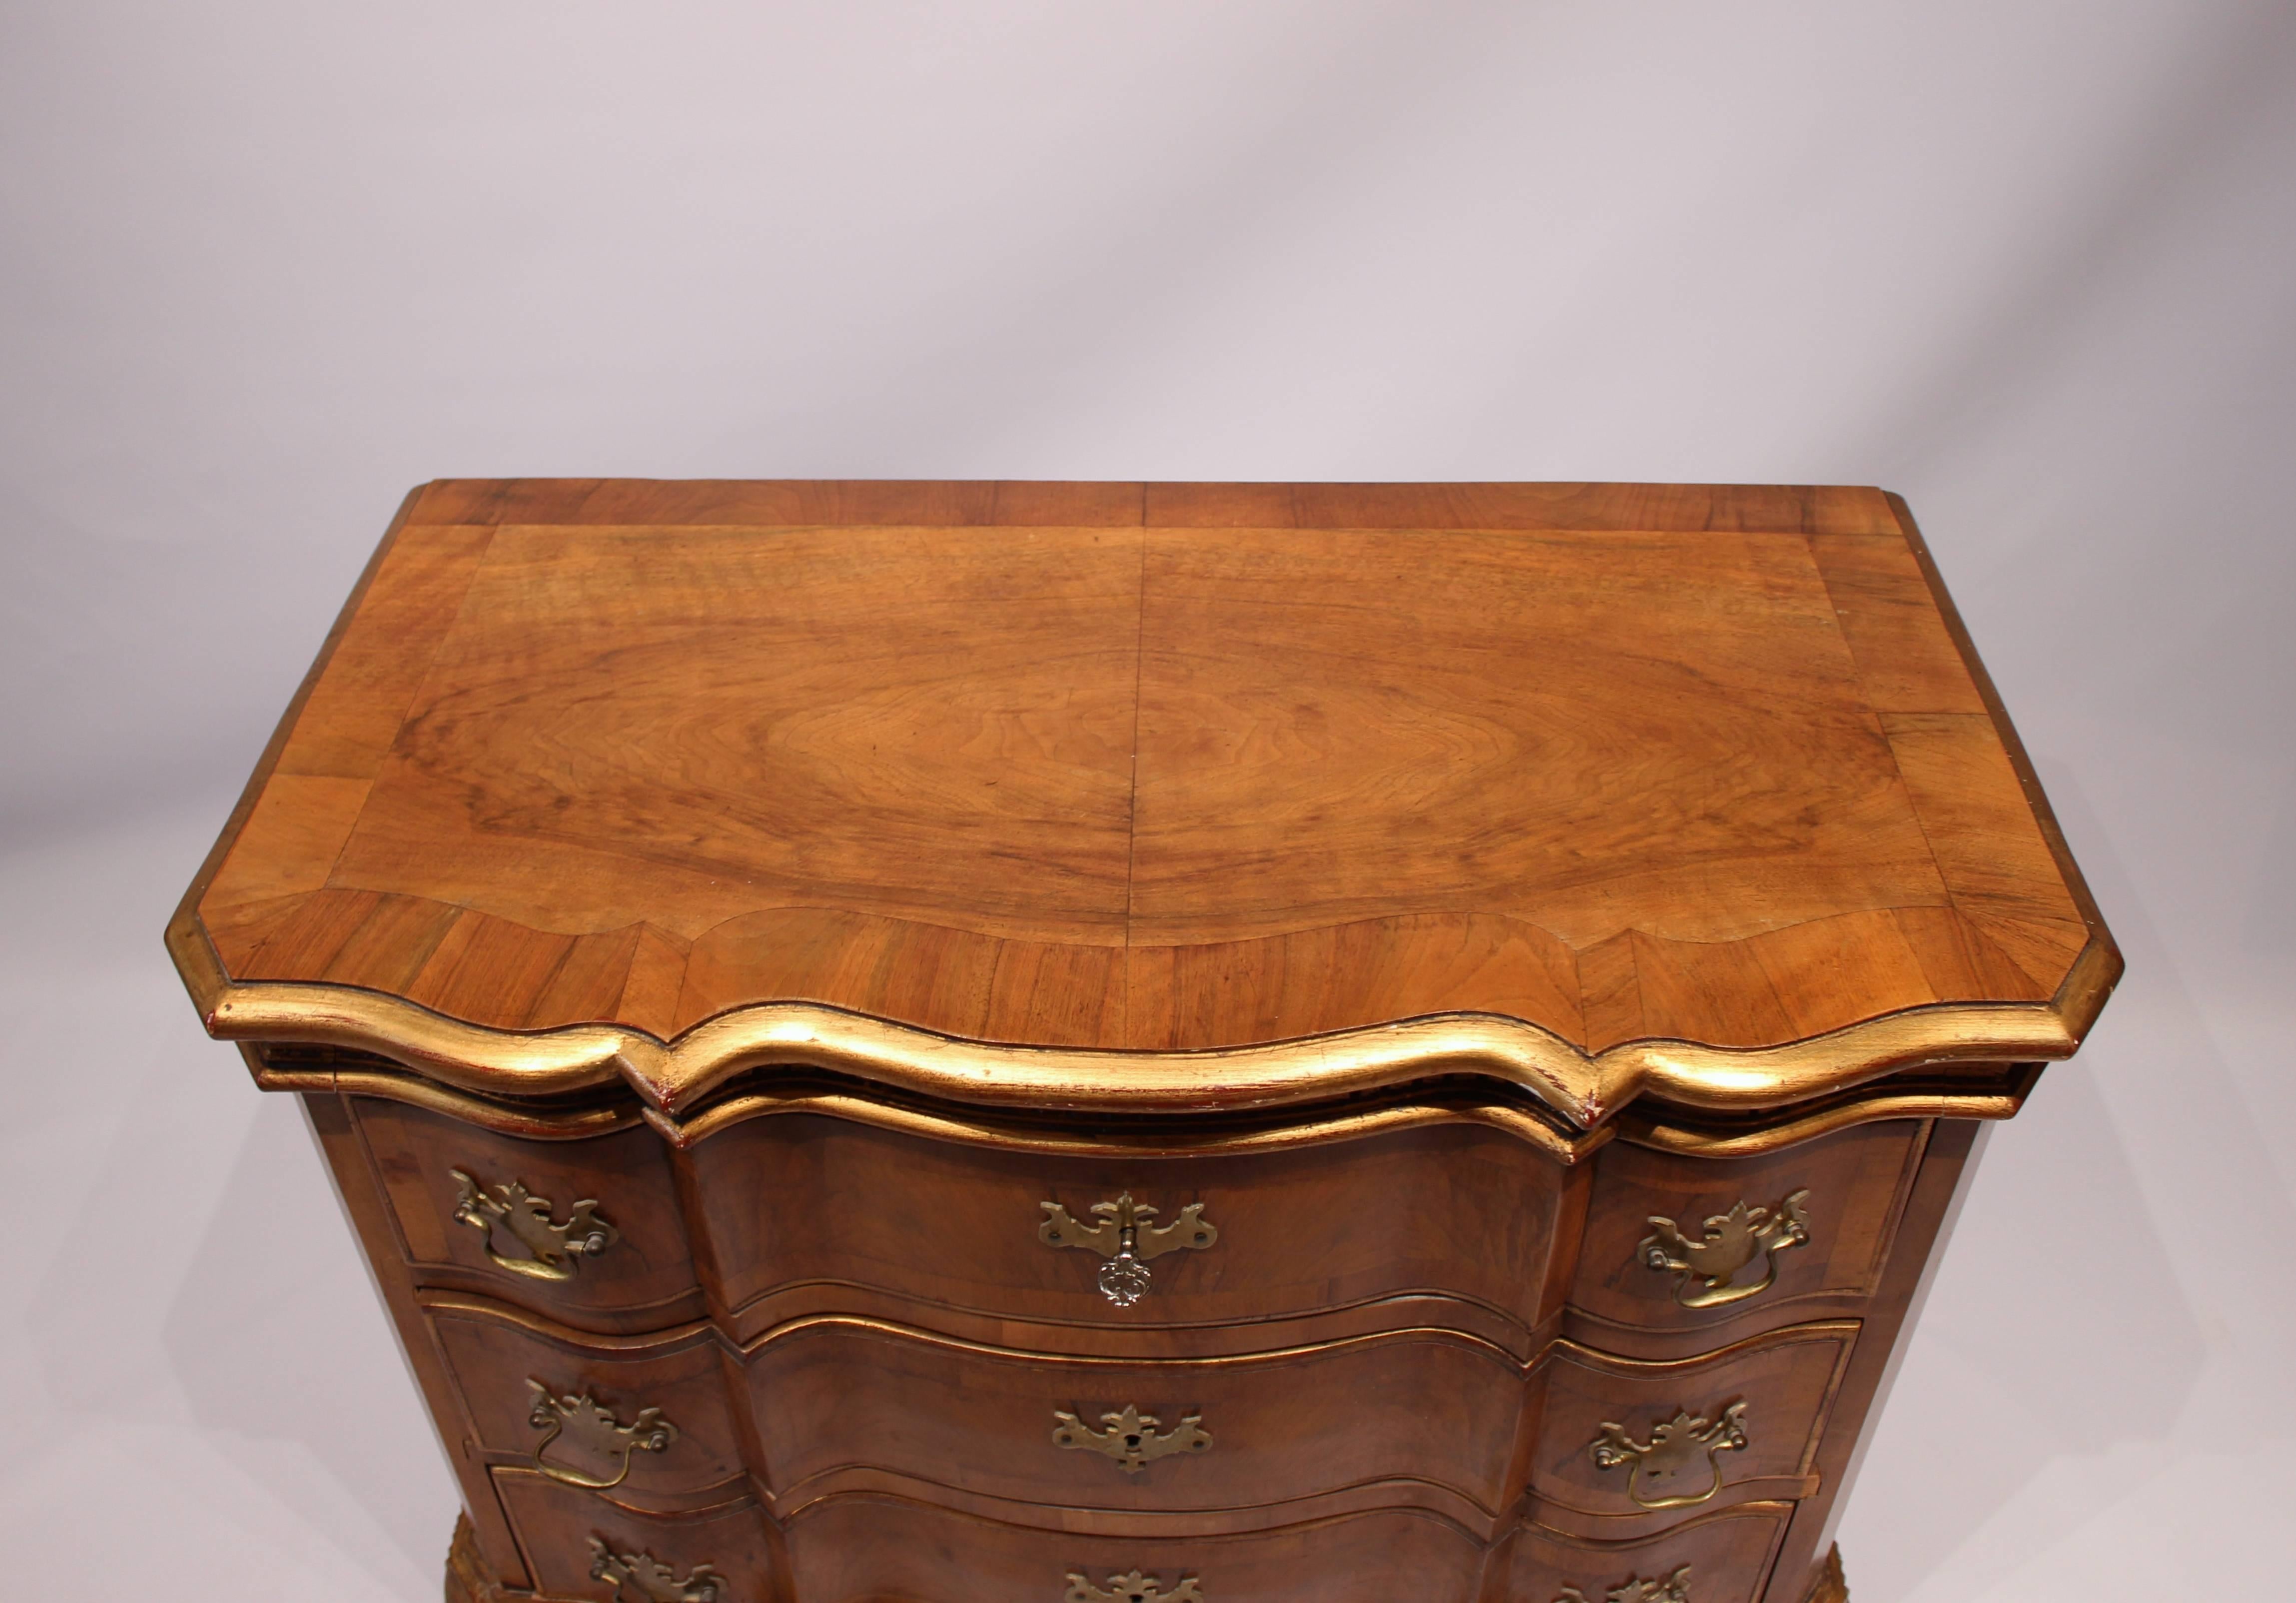 Danish Rococo Chest of Drawers in Walnut Decorated with Gold Leaf from Denmark, 1880s